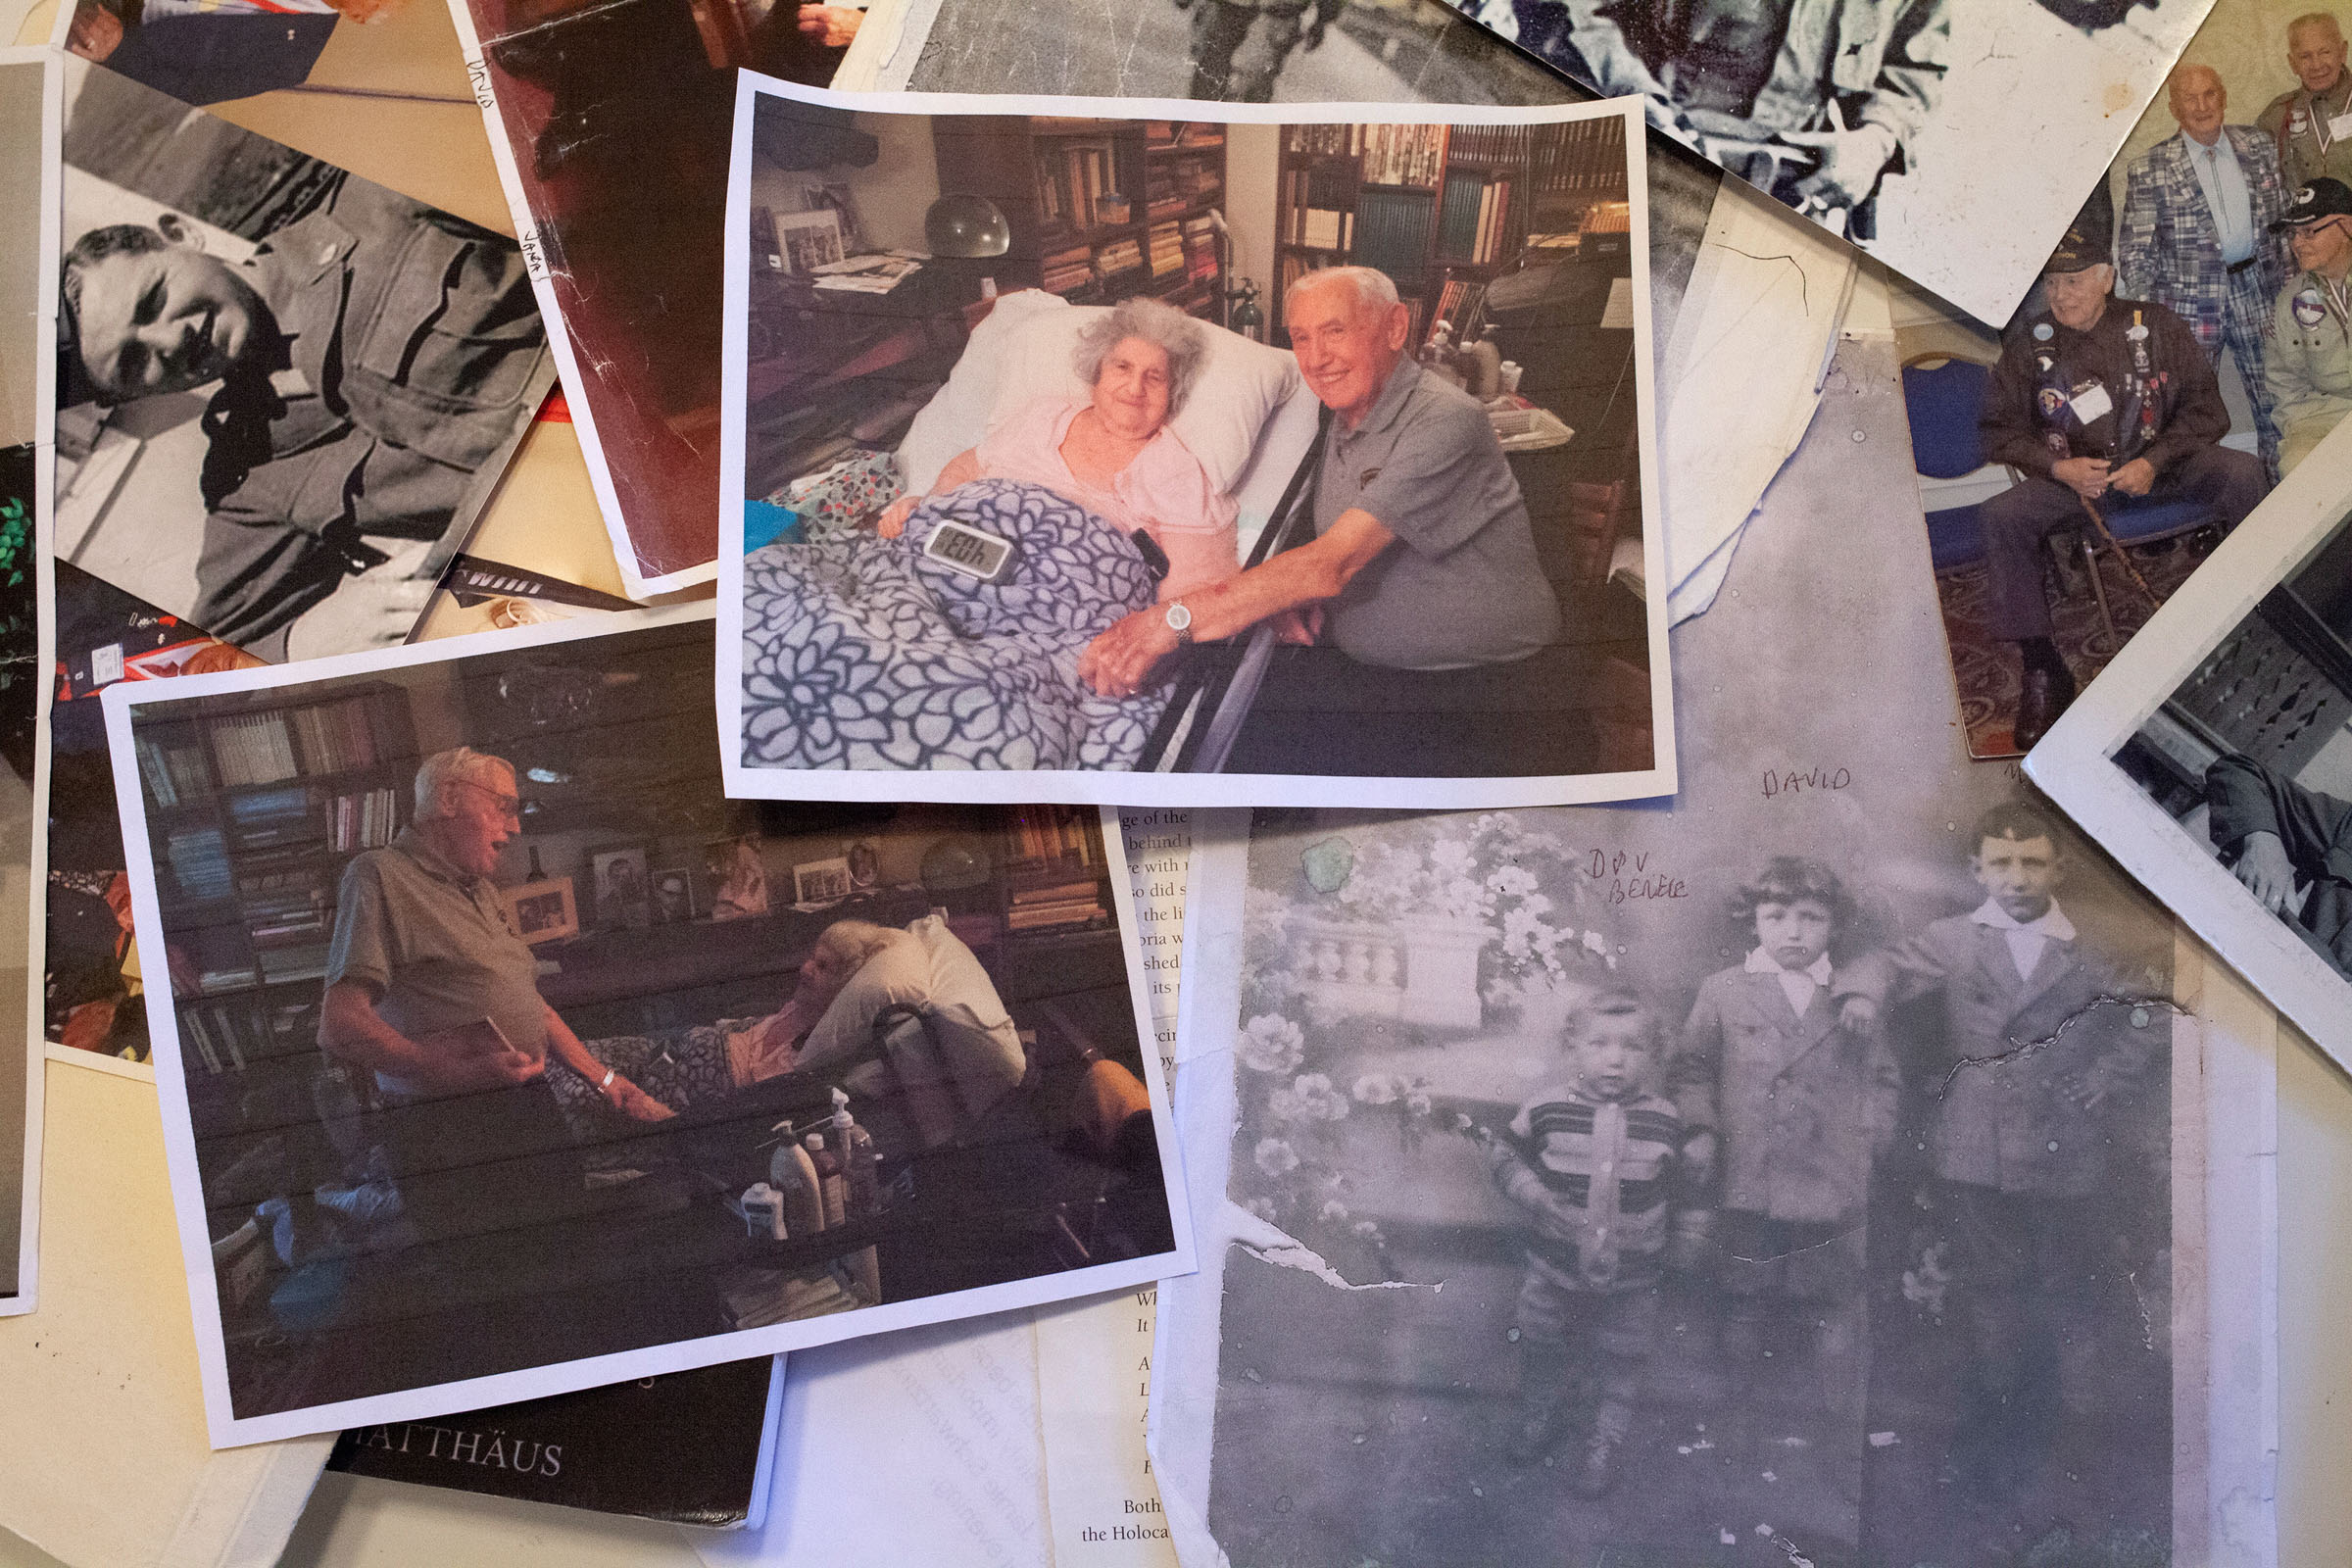 Various photographs of David Wisnia, an Auschwitz survivor, including some of his reunion with Helen Spitzer, a former lover, 72 years later, at his home in Levittown, Pa.